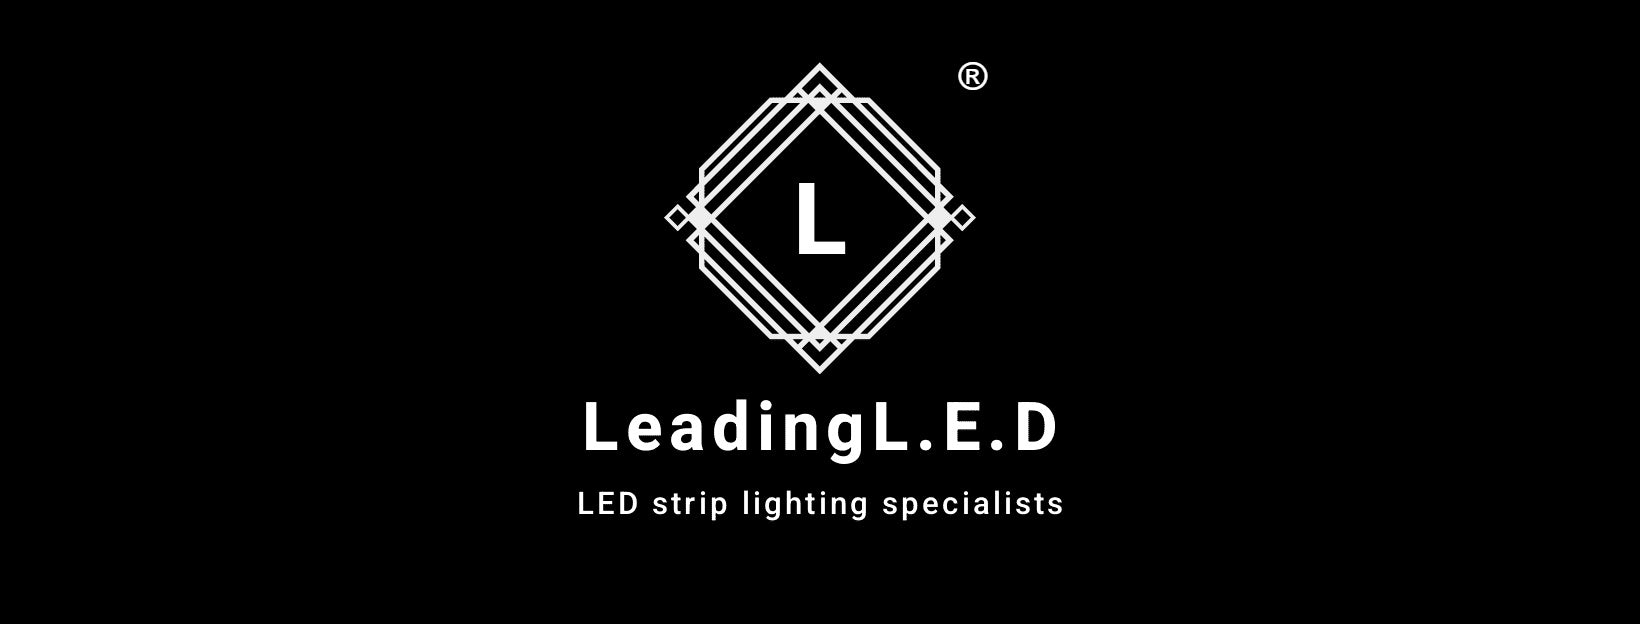 LED strip suppliers in the UK